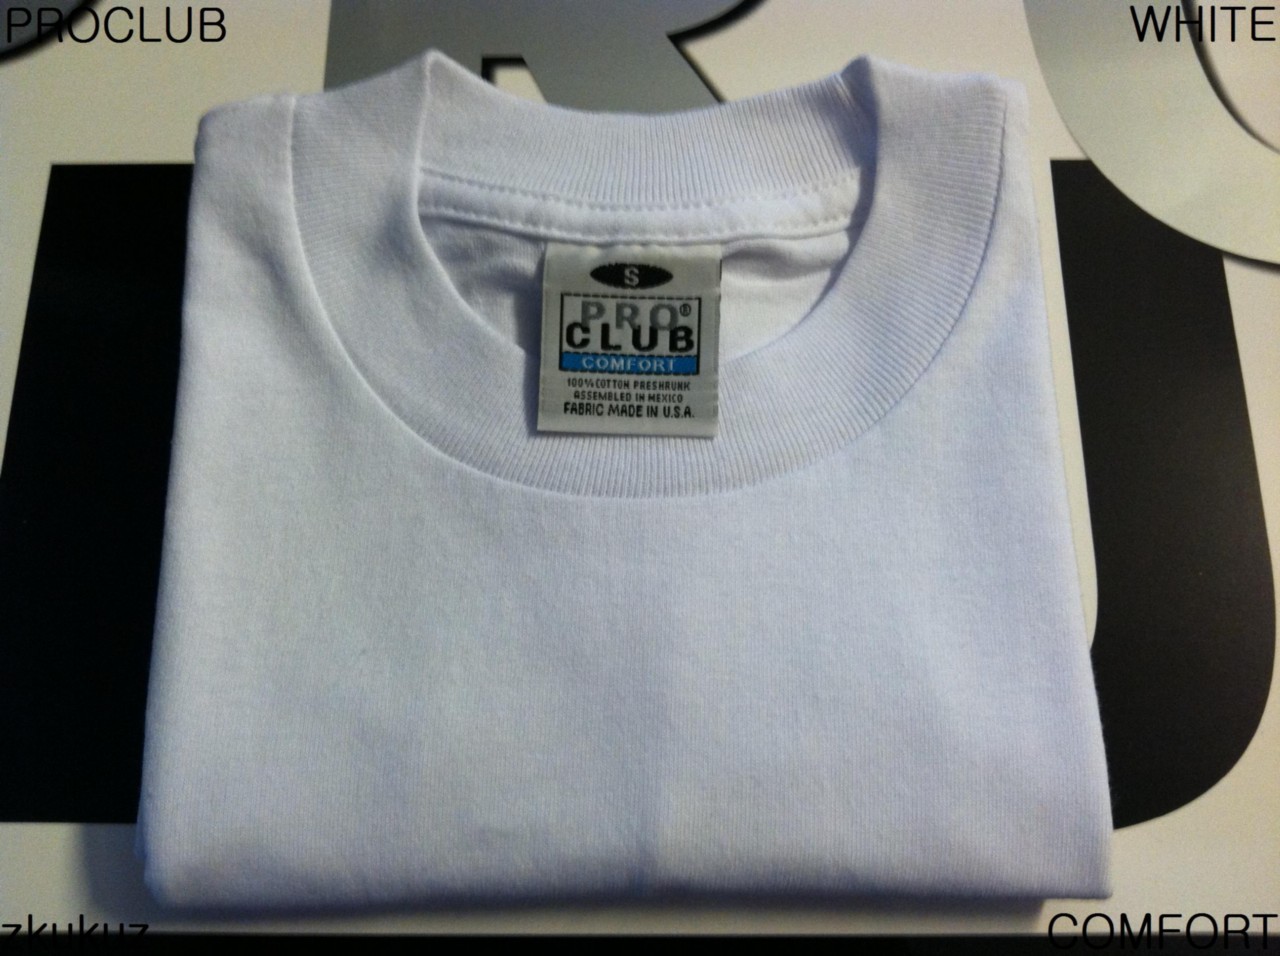 3 NEW PROCLUB LARGE HEAVY WEIGHT T-SHIRTS PLAIN TEE PRO CLUB COLOR BLANK 3PC 